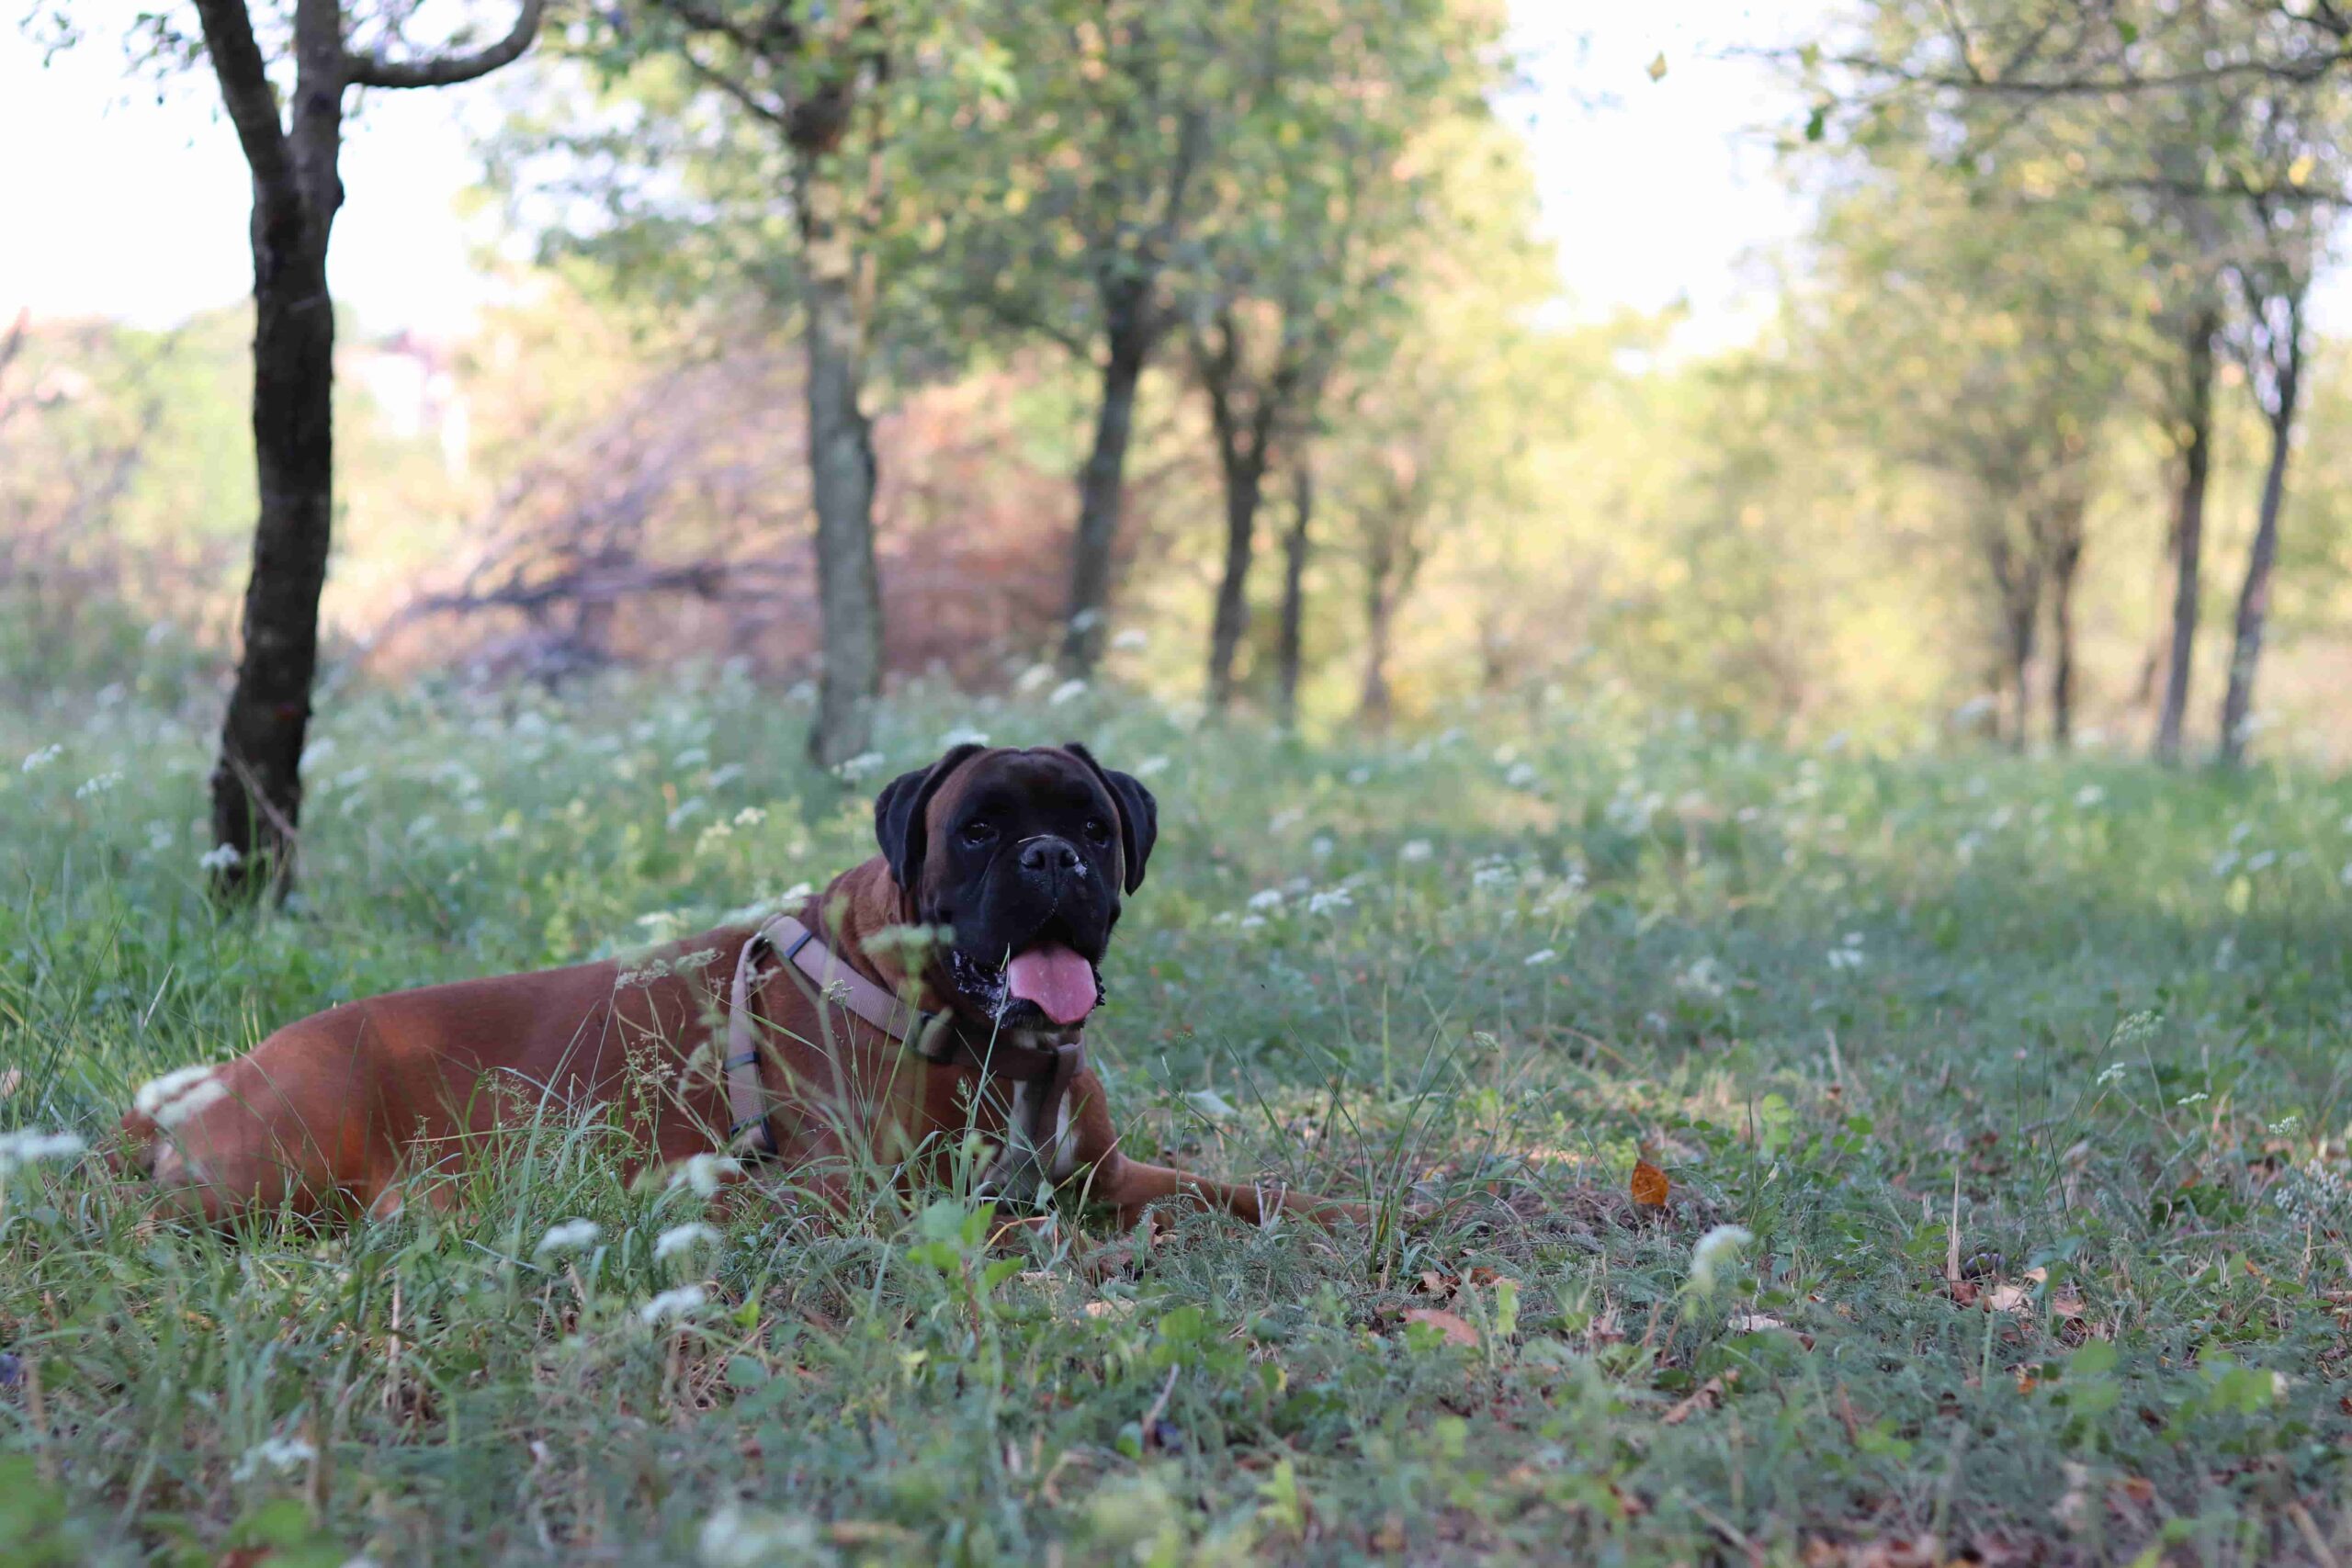 A German boxer with a black face stuck out his tongue and lay on the grass surrounded by flowers and trees